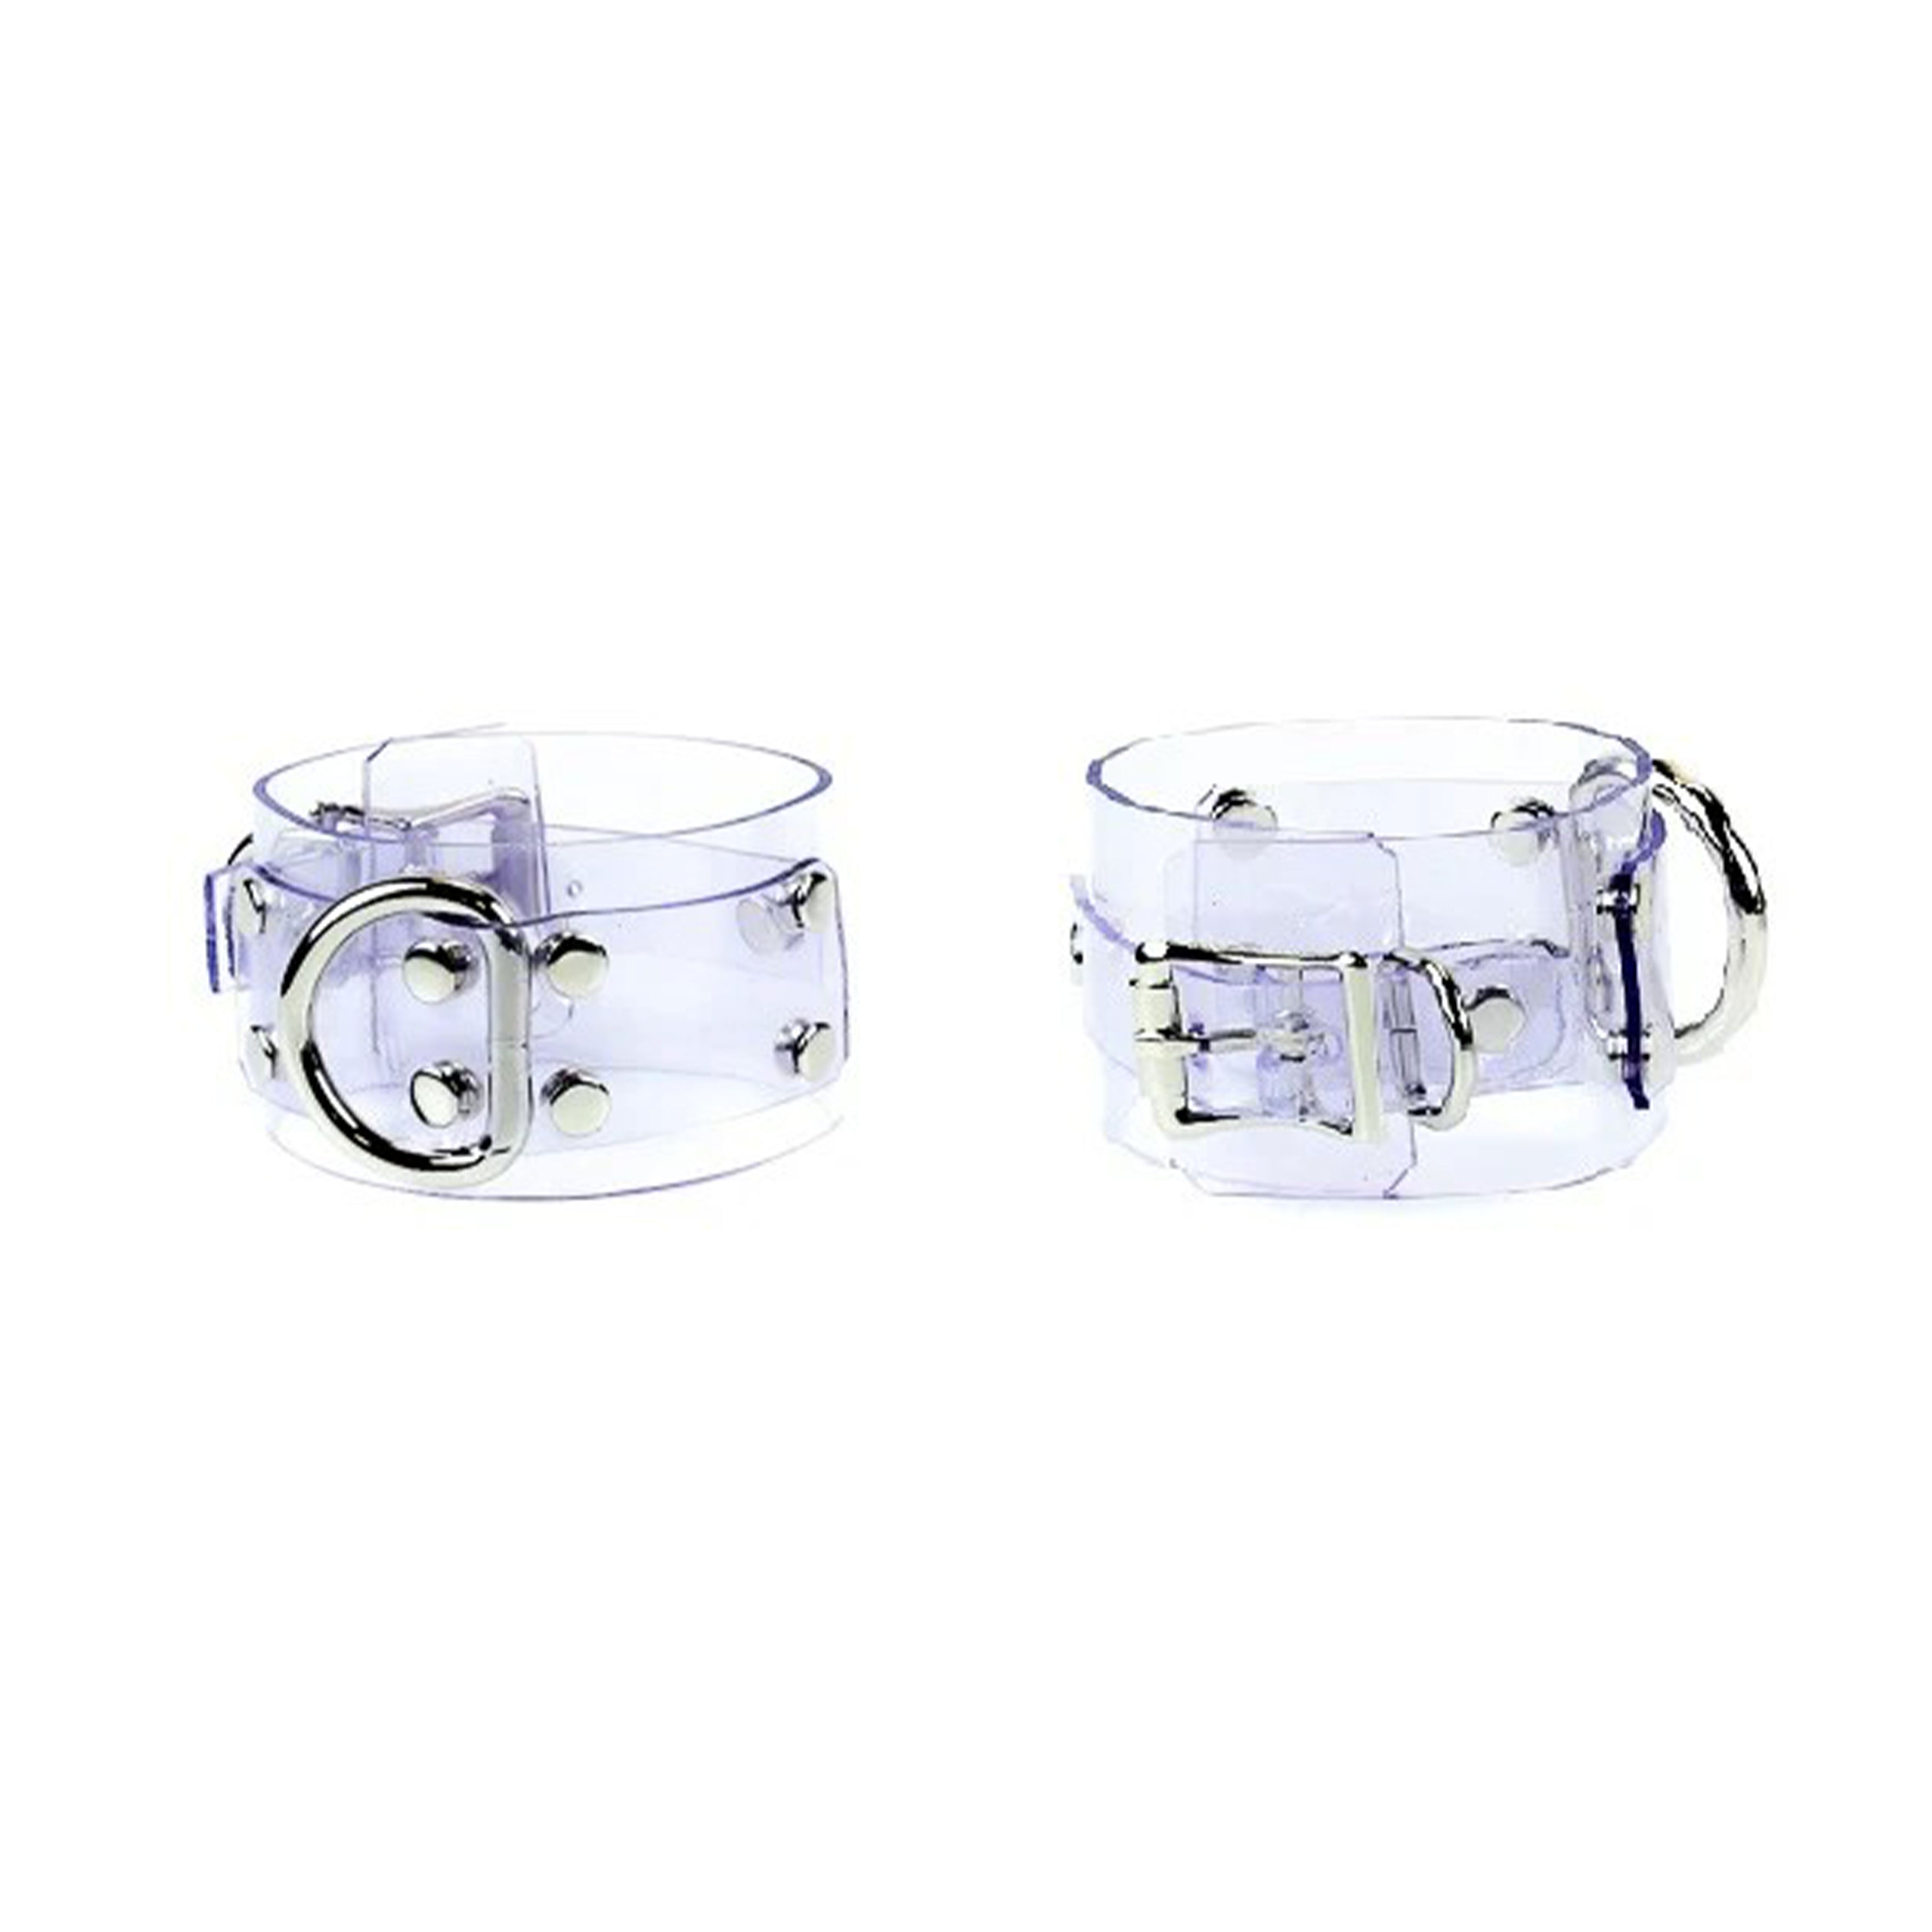 D Ring Wrist Cuff with Buckle Closure